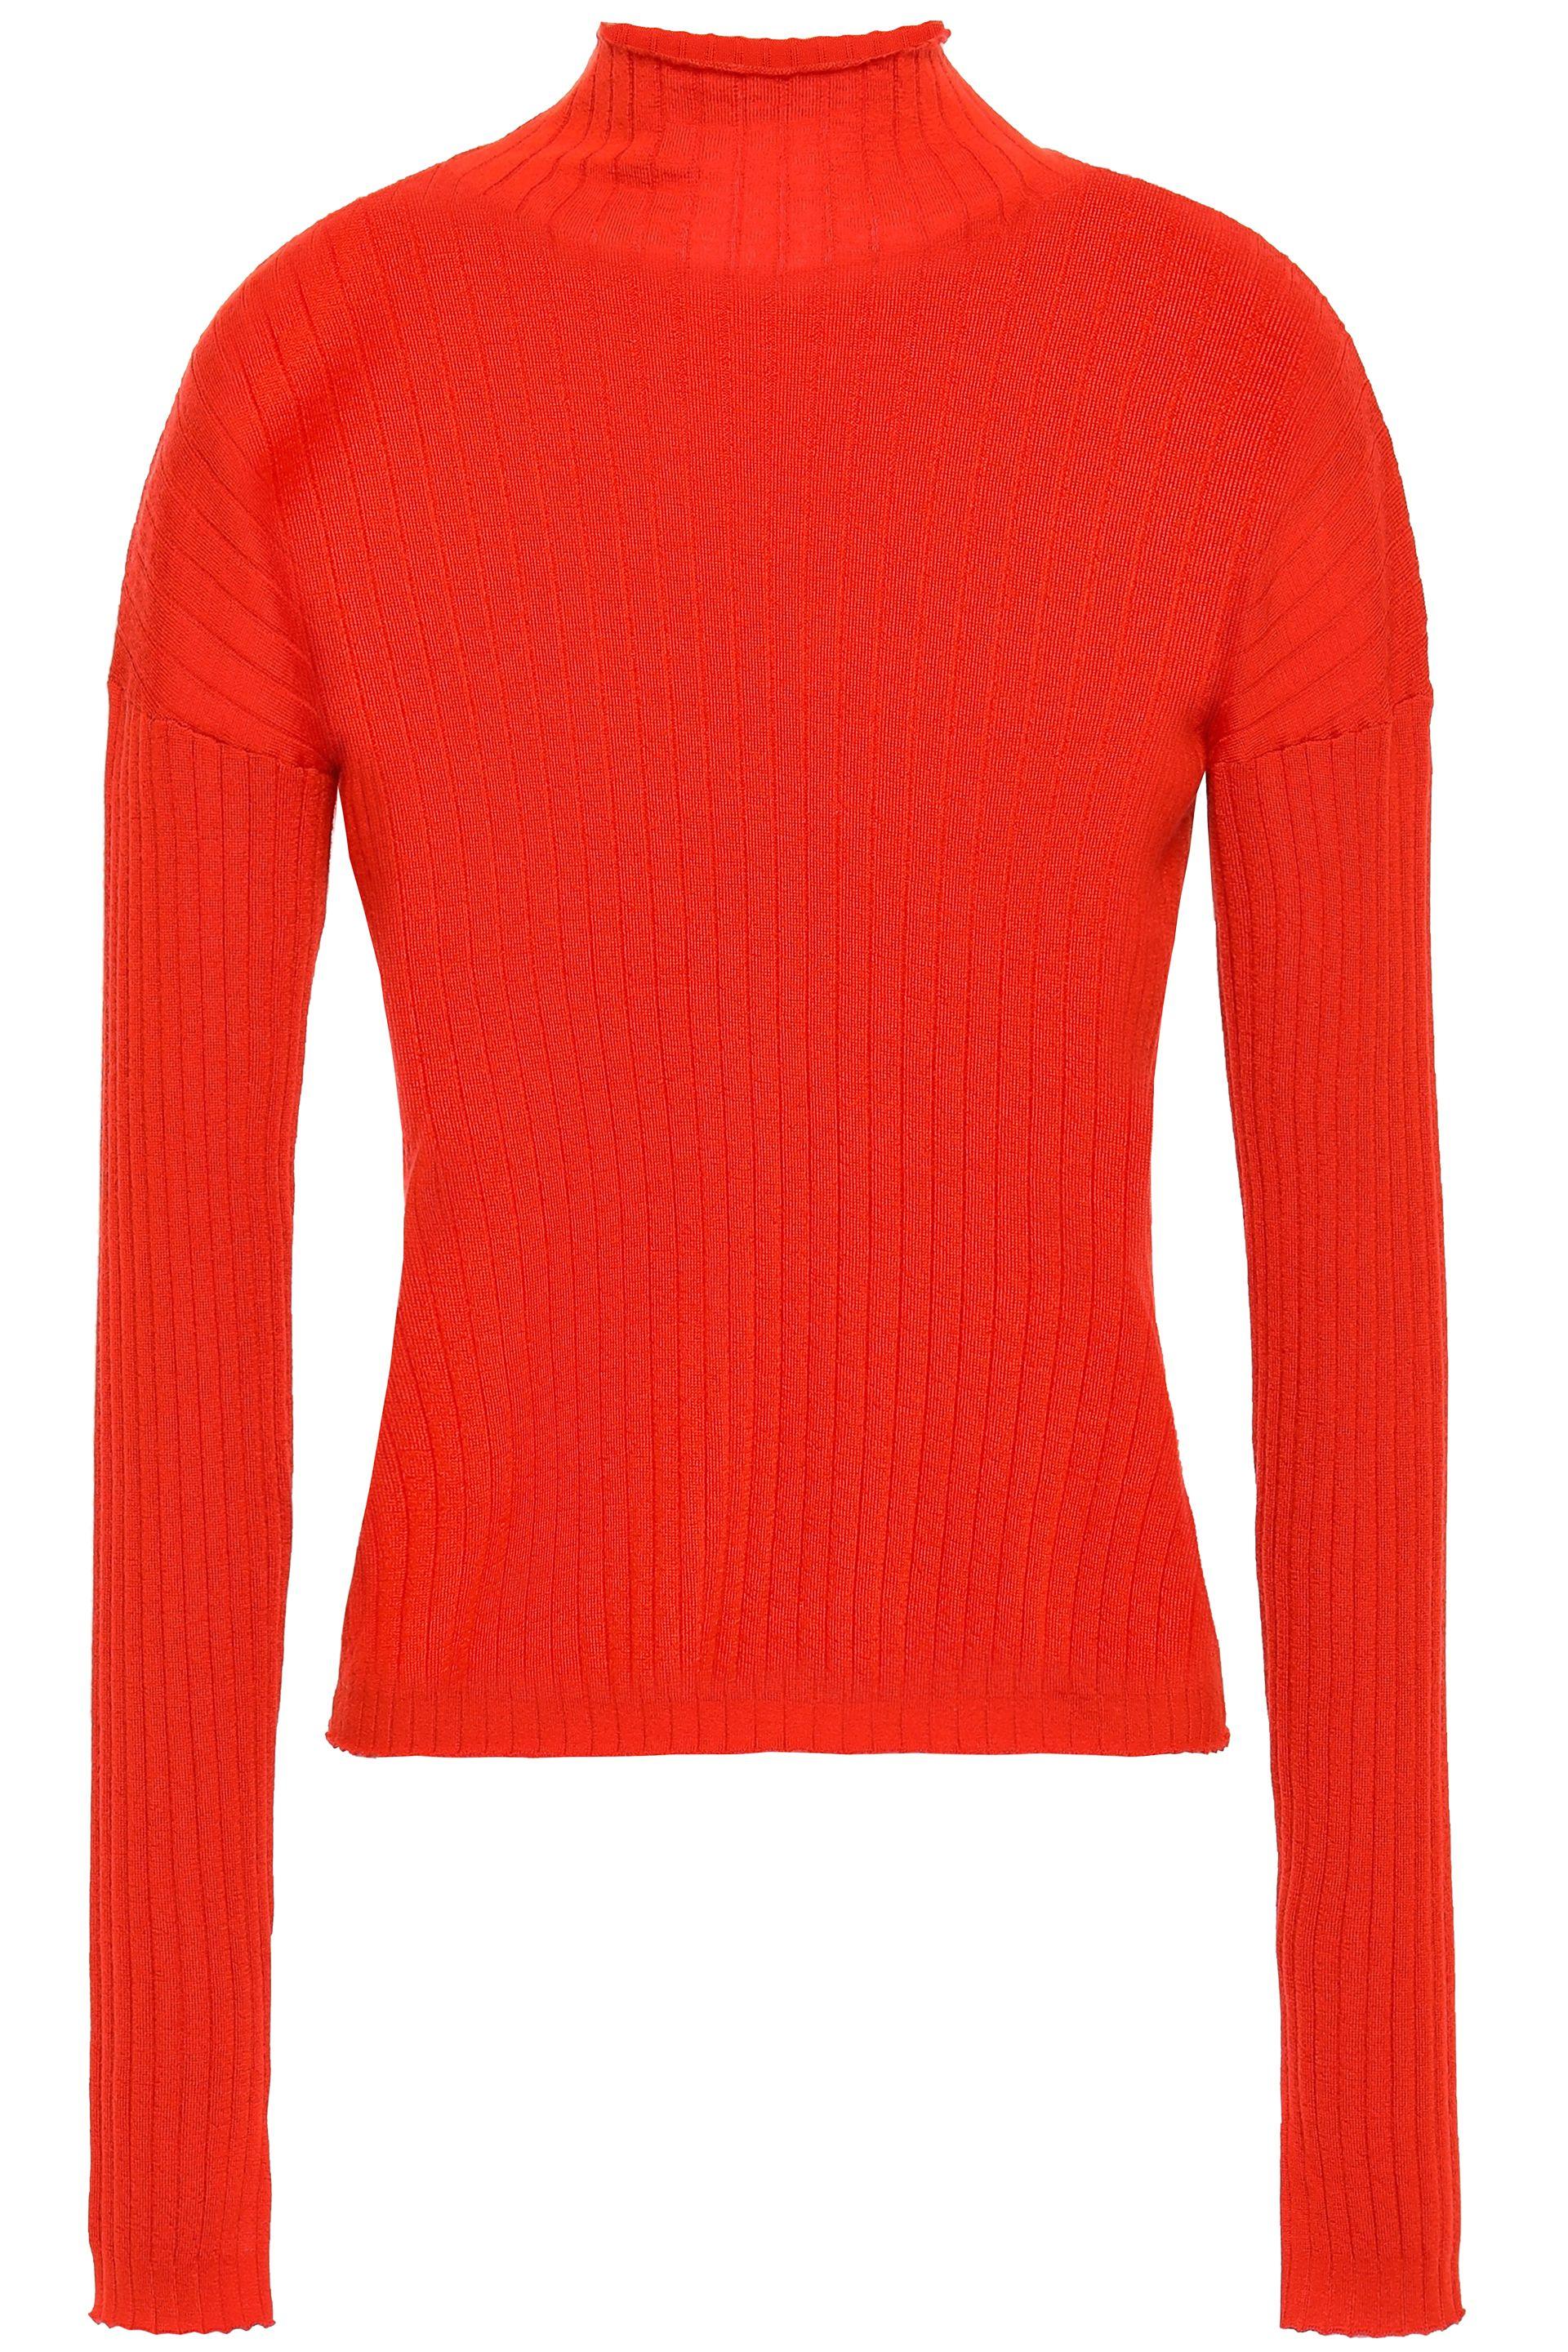 N.Peal Cashmere Ribbed Cashmere Turtleneck Sweater Tomato Red - Lyst